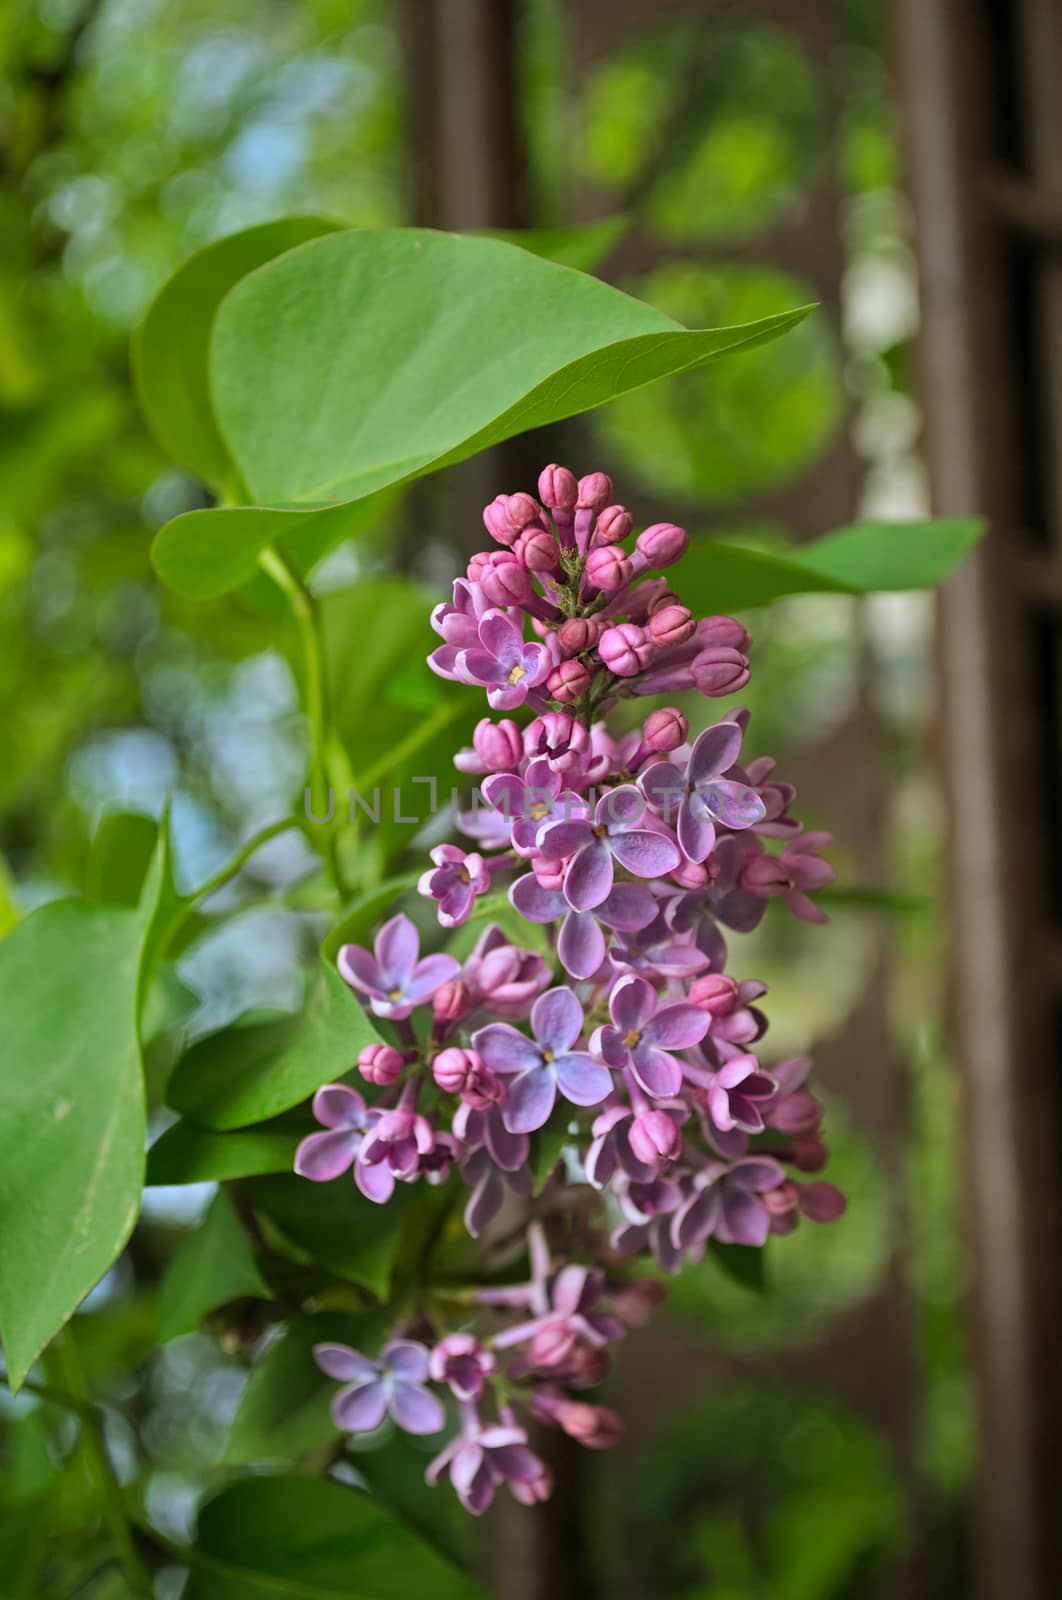 Lilac blooming flowers at spring time, closeup by sheriffkule